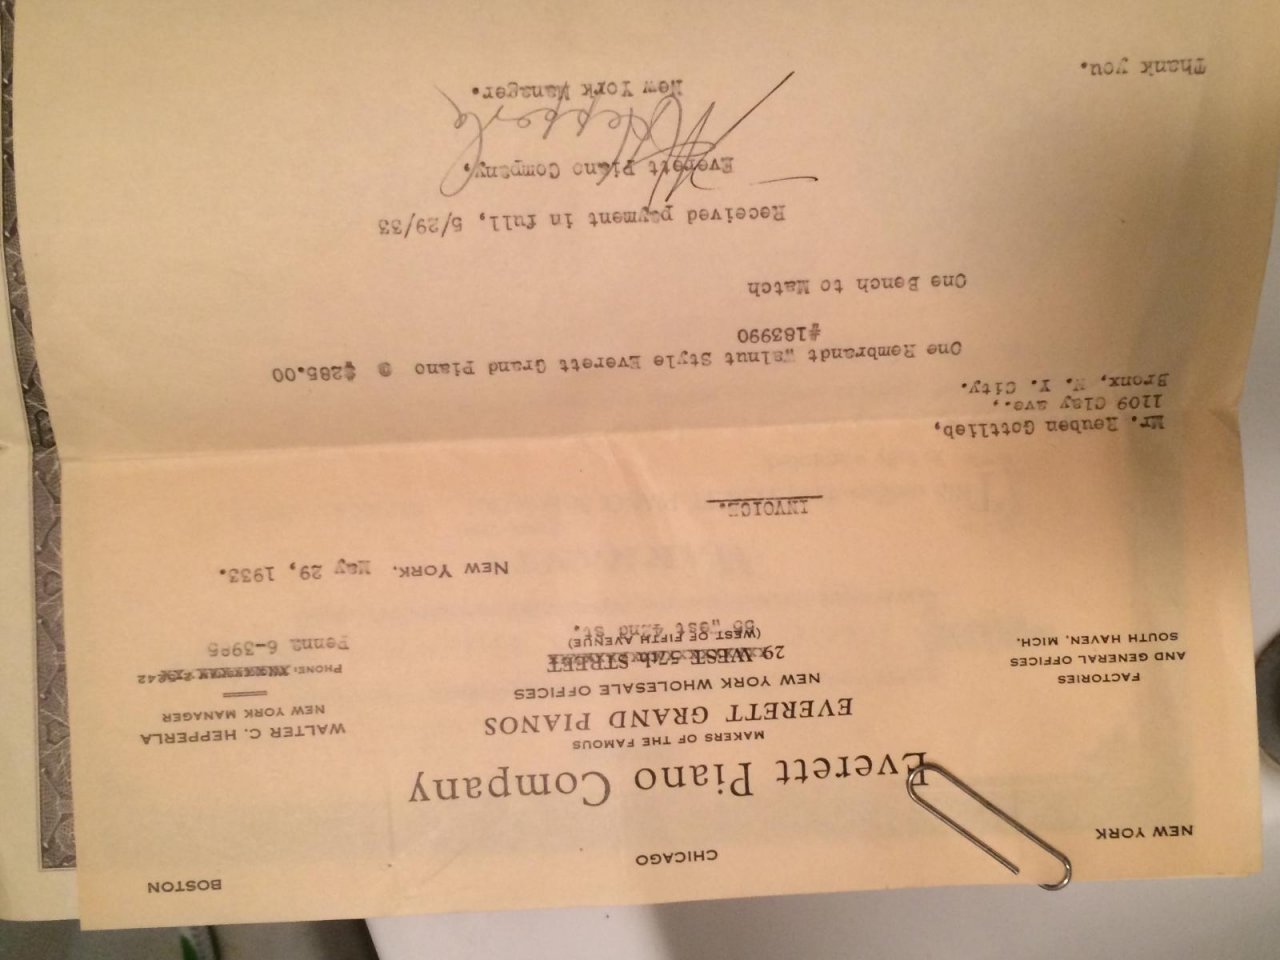 we-have-an-everett-piano-with-the-original-bill-of-sale-from-1933-that-has-my-piano-friends